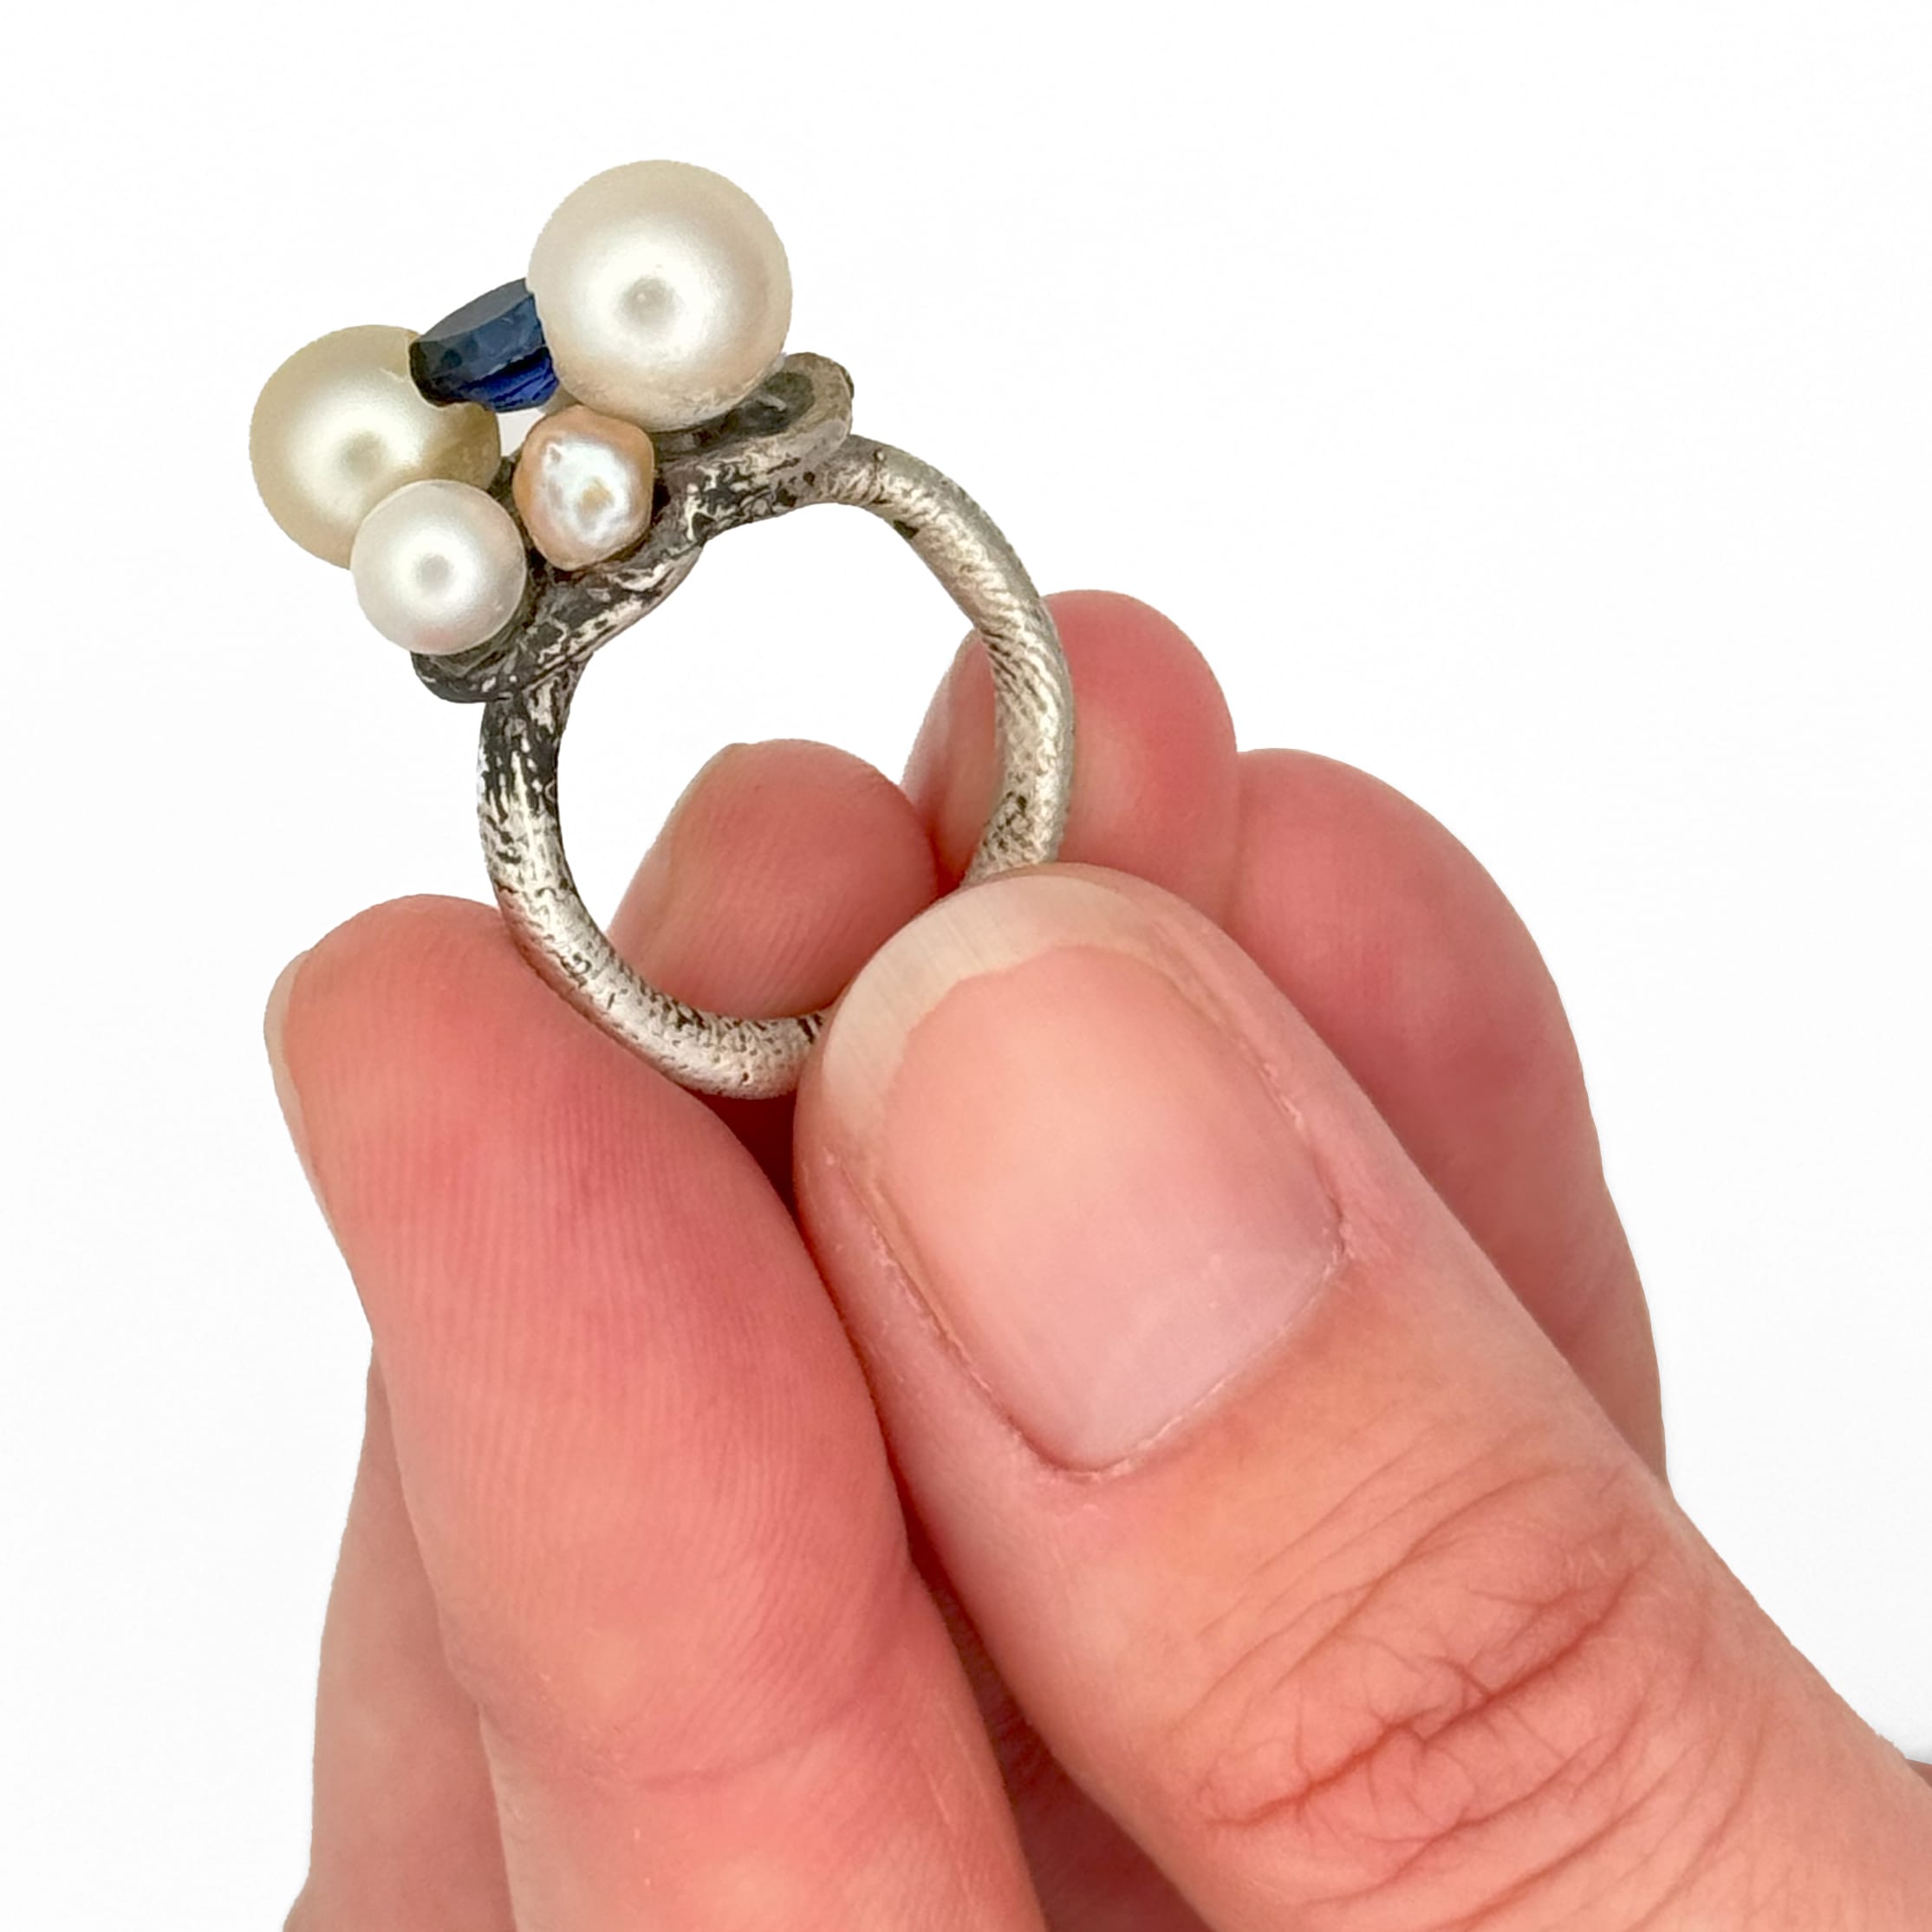 Pearl and sapphire ring, Simon Gomez, Freehand Gallery